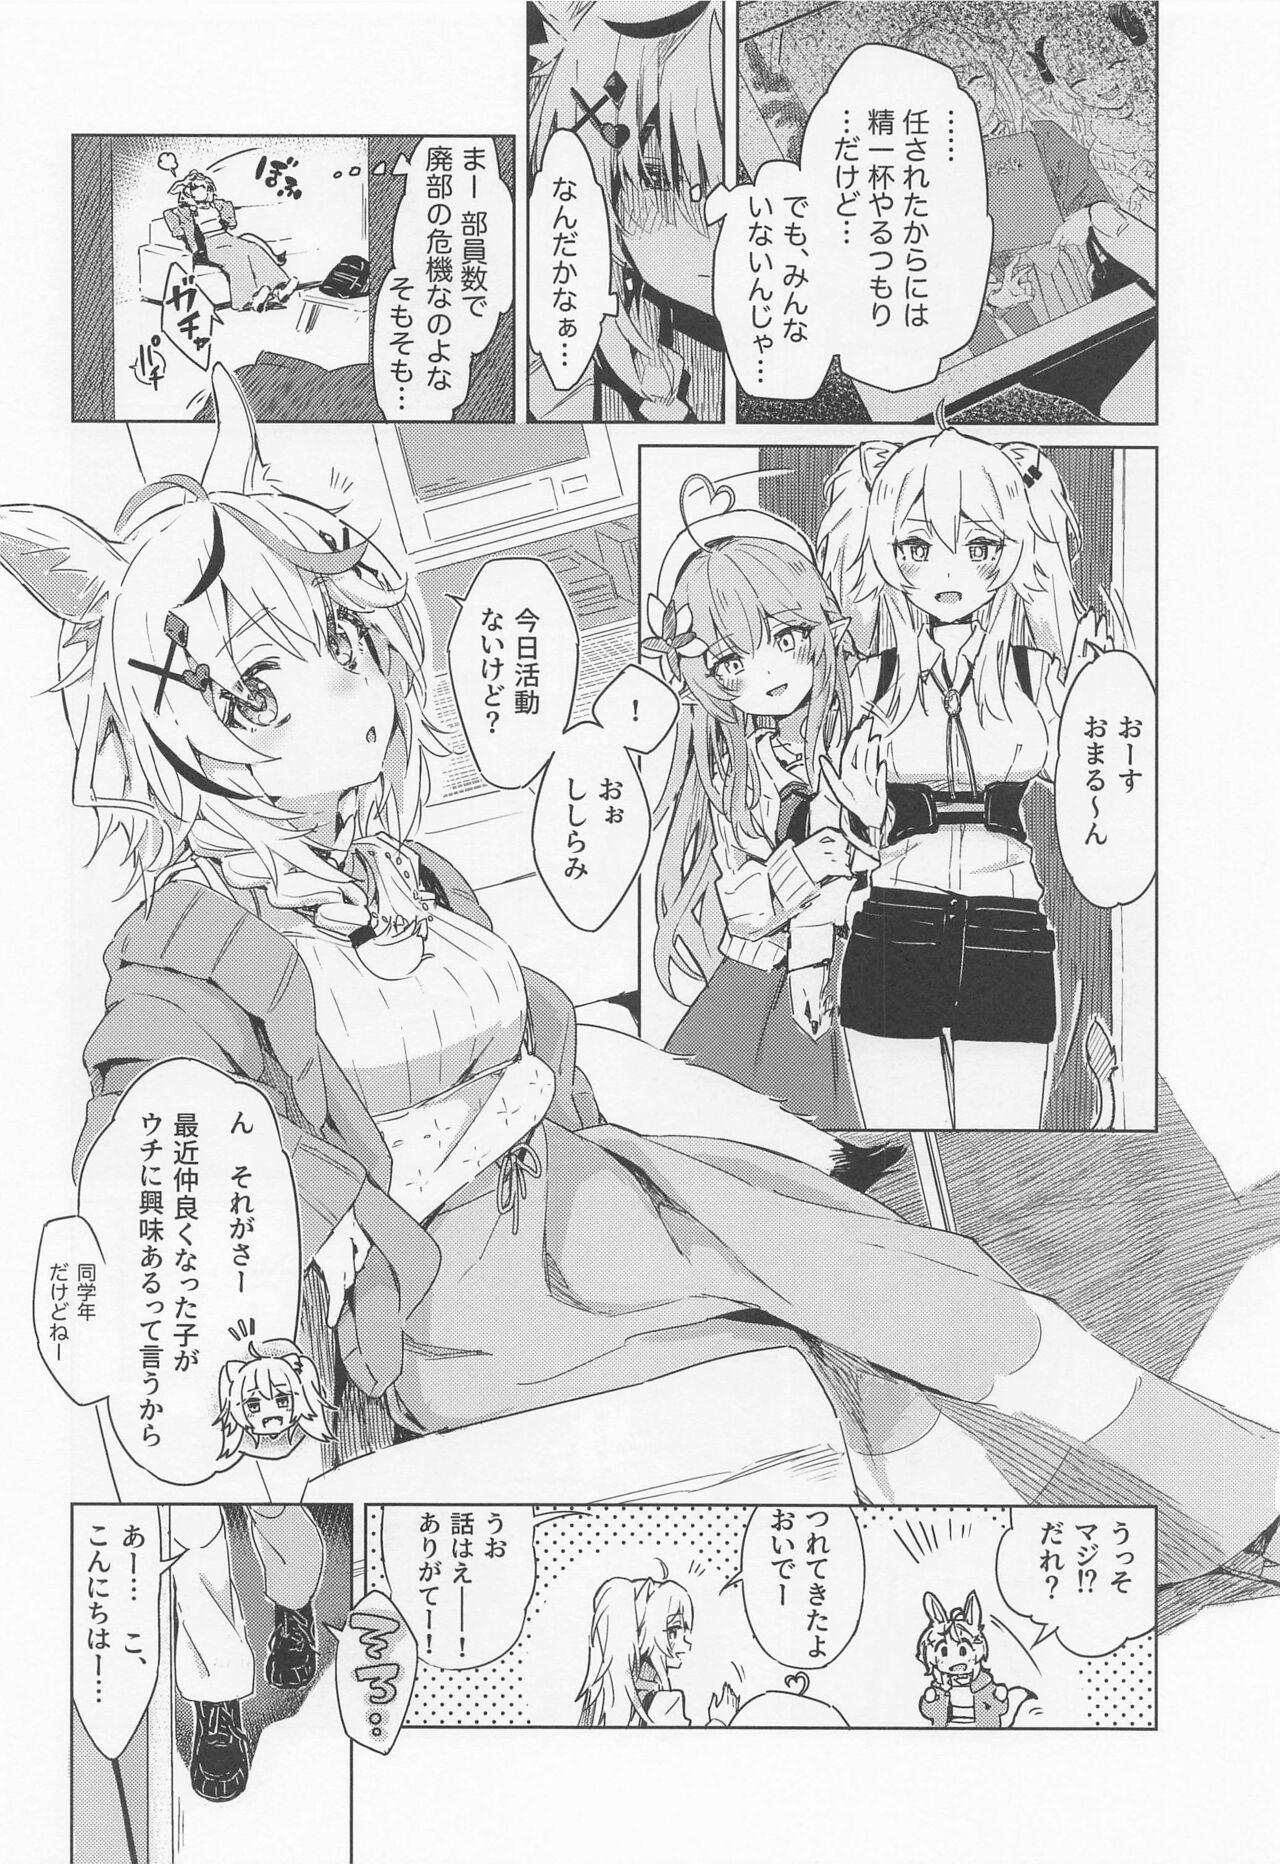 Blond Fennec wa Iseijin no Yume o Miru ka - Does The Fennec Dream of The Lovely Visitor? - Hololive Mamando - Page 3